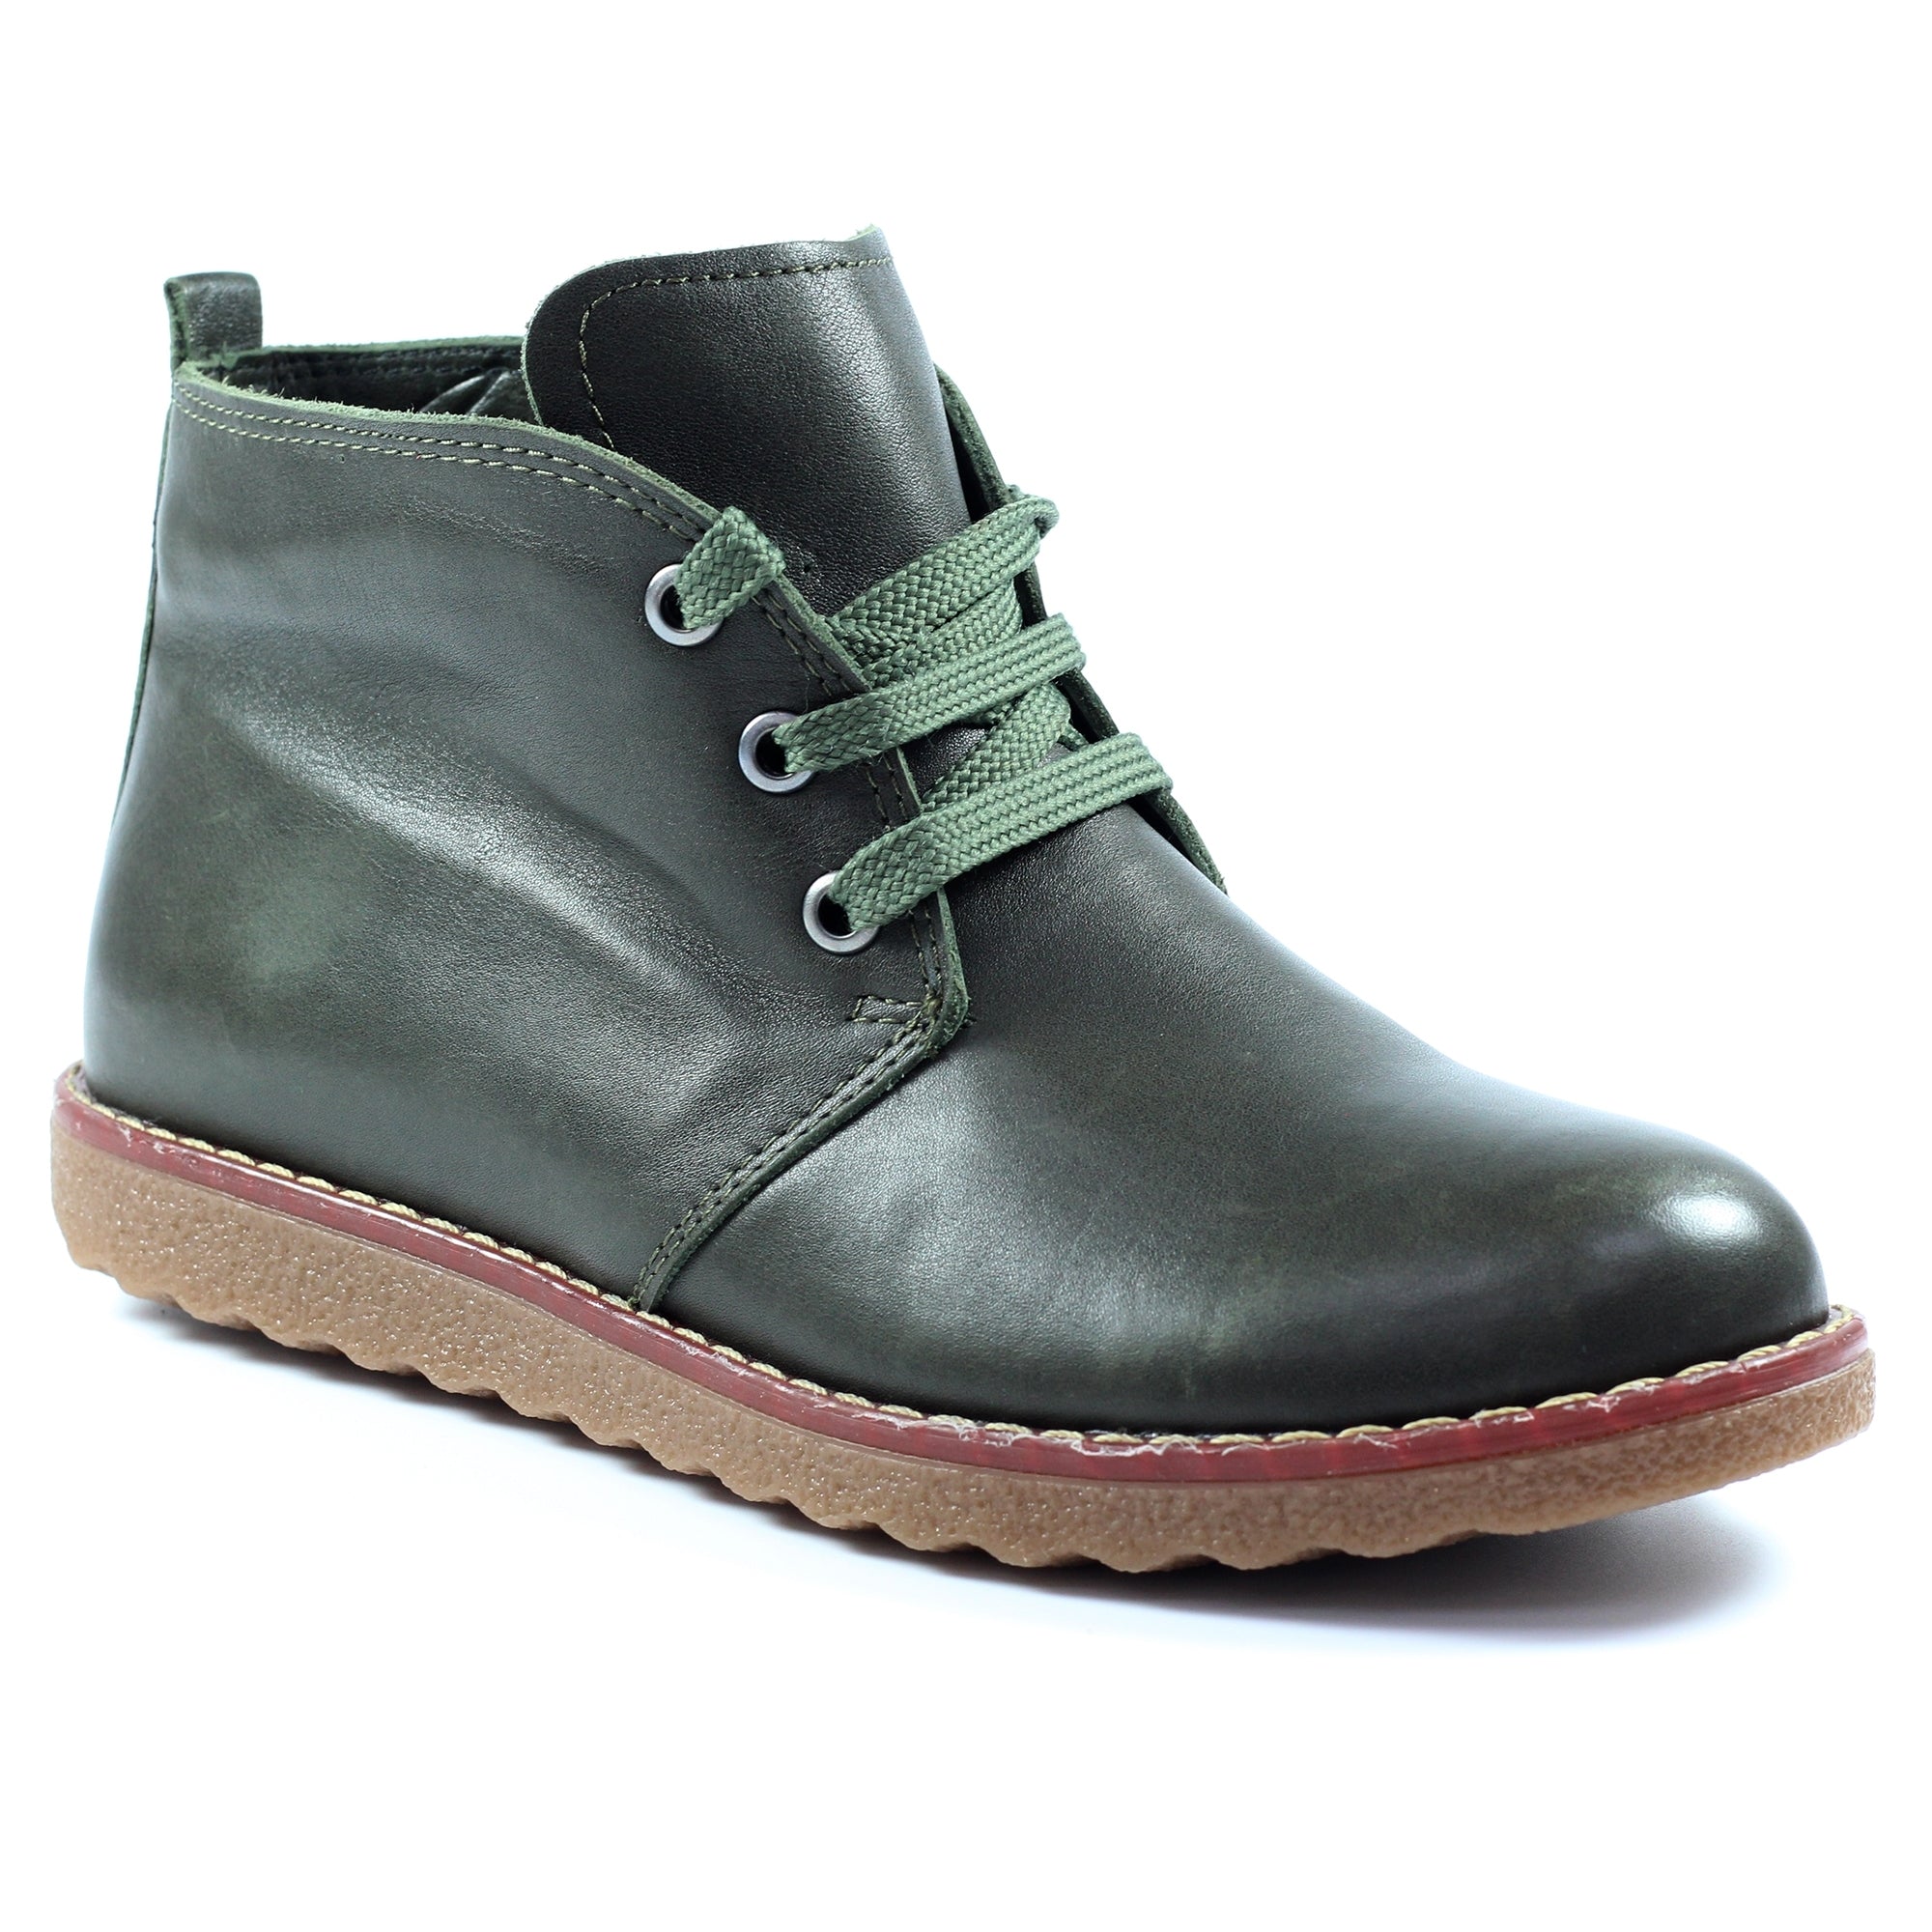 Lunar Claire Mid Leather Ankle Boot